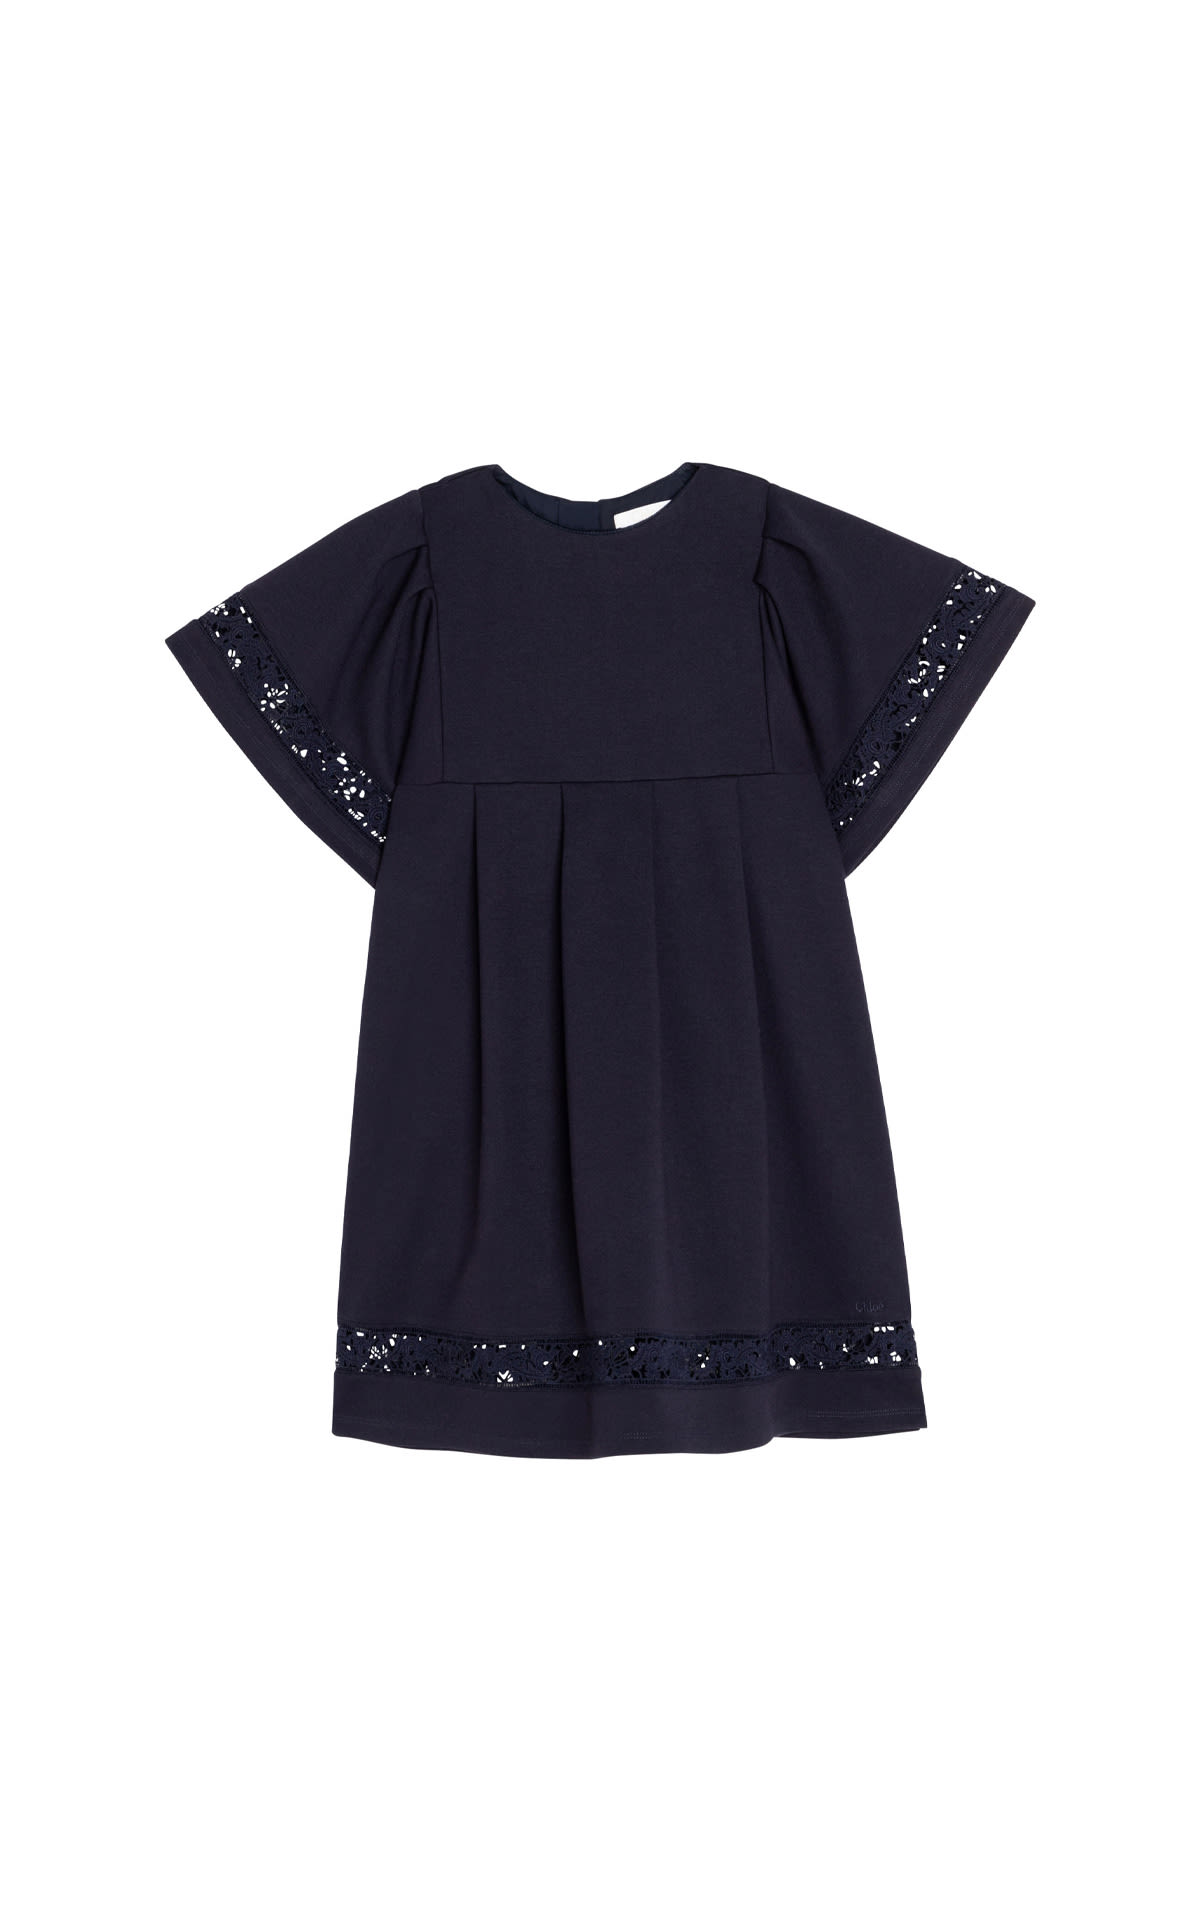 Kids Around Chloe |  Blue dress with embroidery